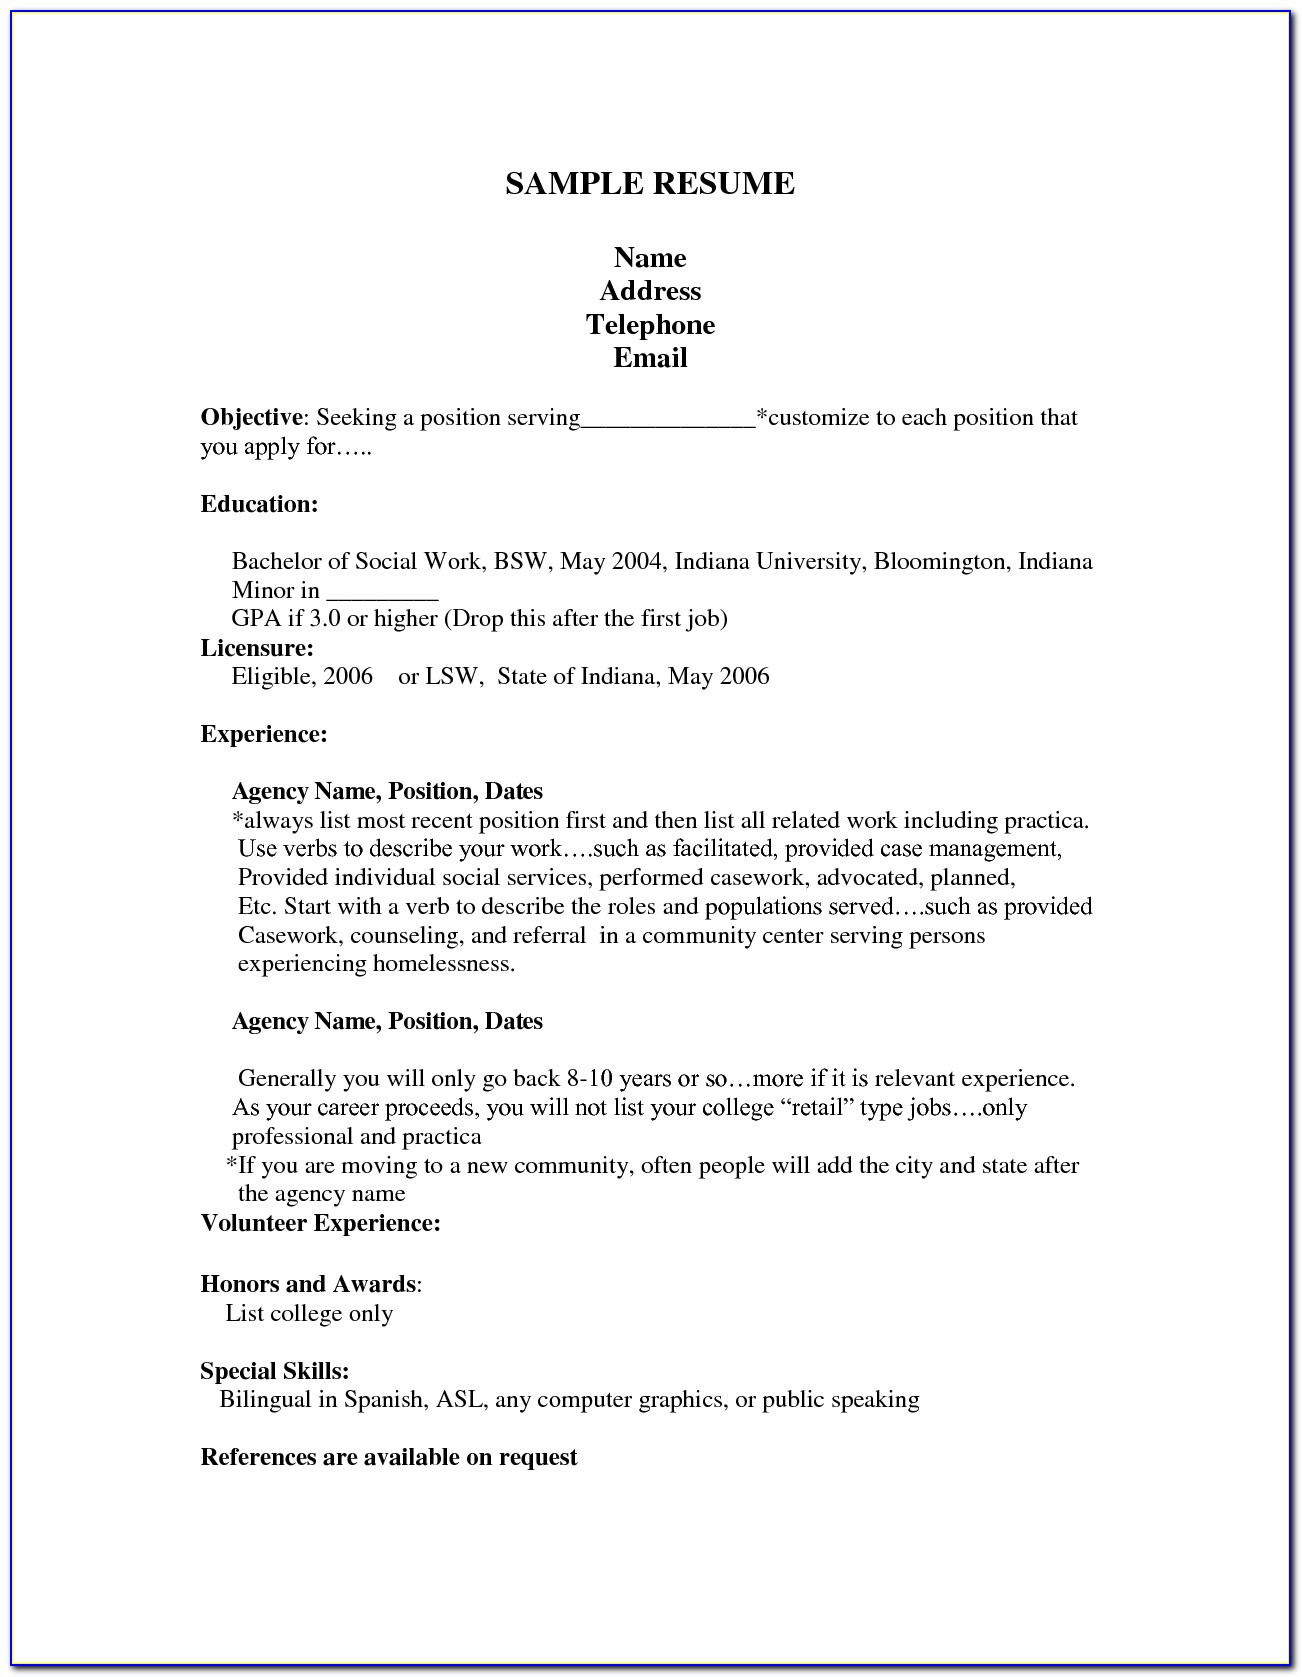 Sample Resume for Search Engine Evaluator Resume Search Engine Evaluator